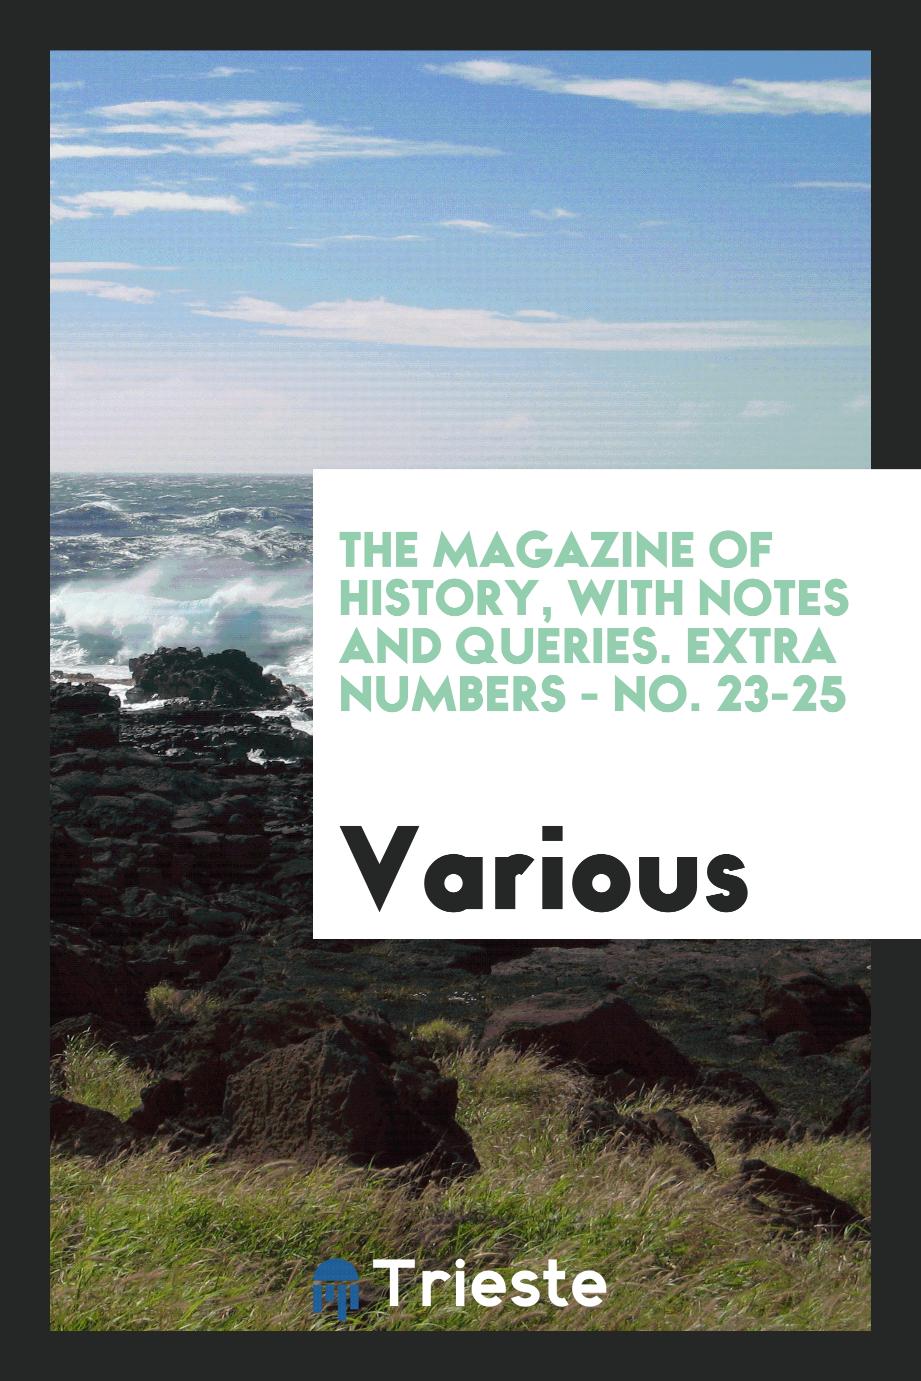 The Magazine of History, with Notes and Queries. Extra Numbers - No. 23-25